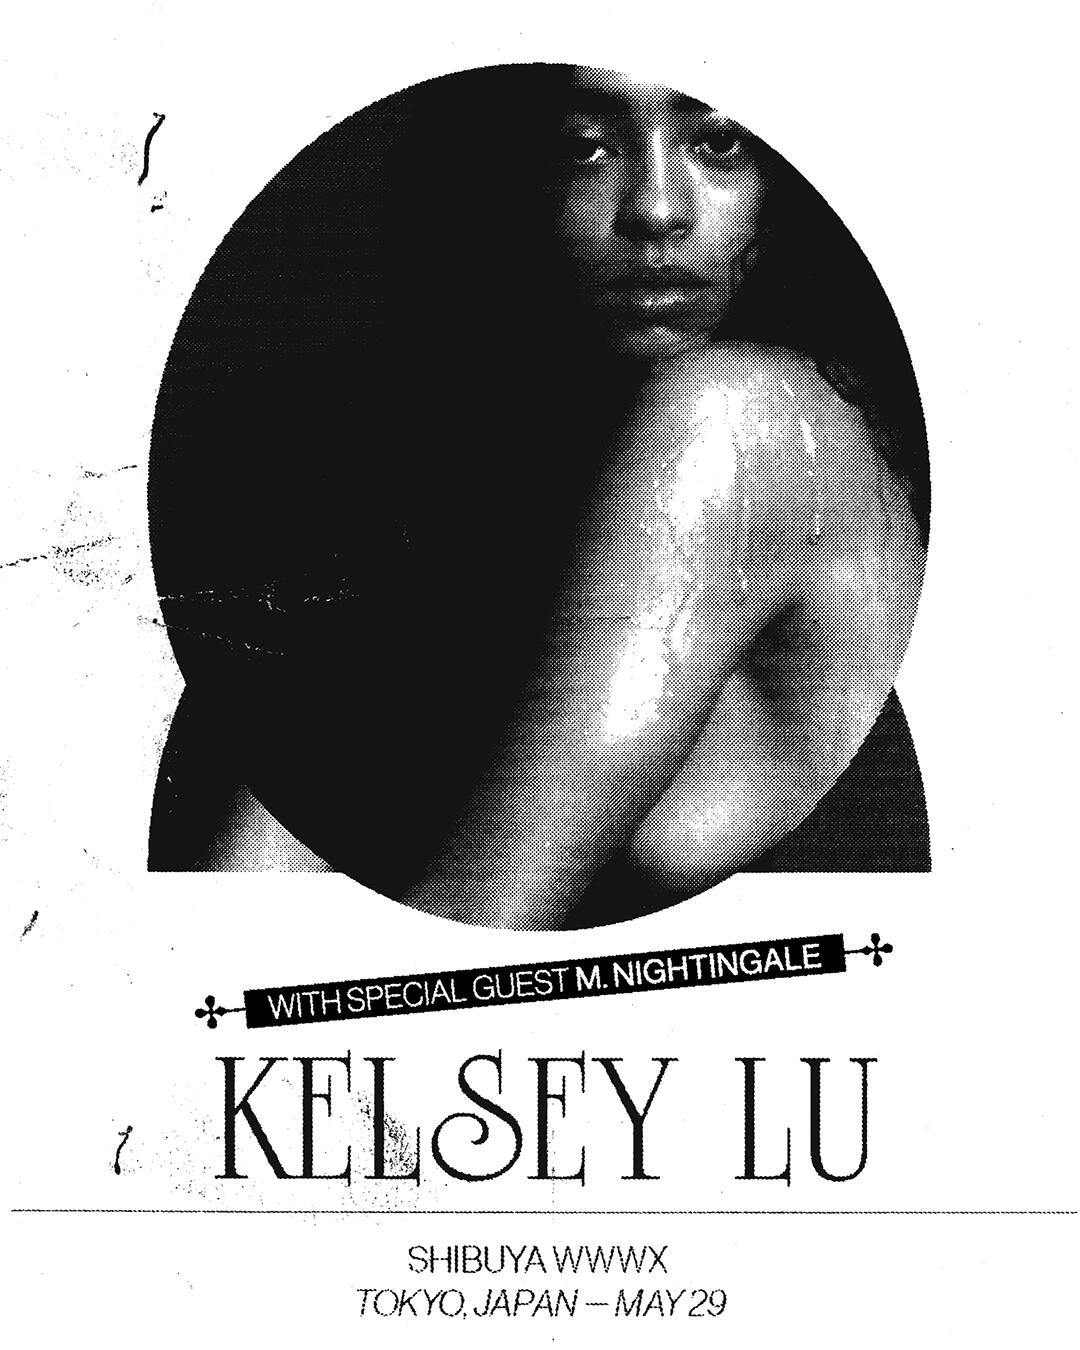 Kelsey Lu with Special Guest: M.NIGHTINGALE